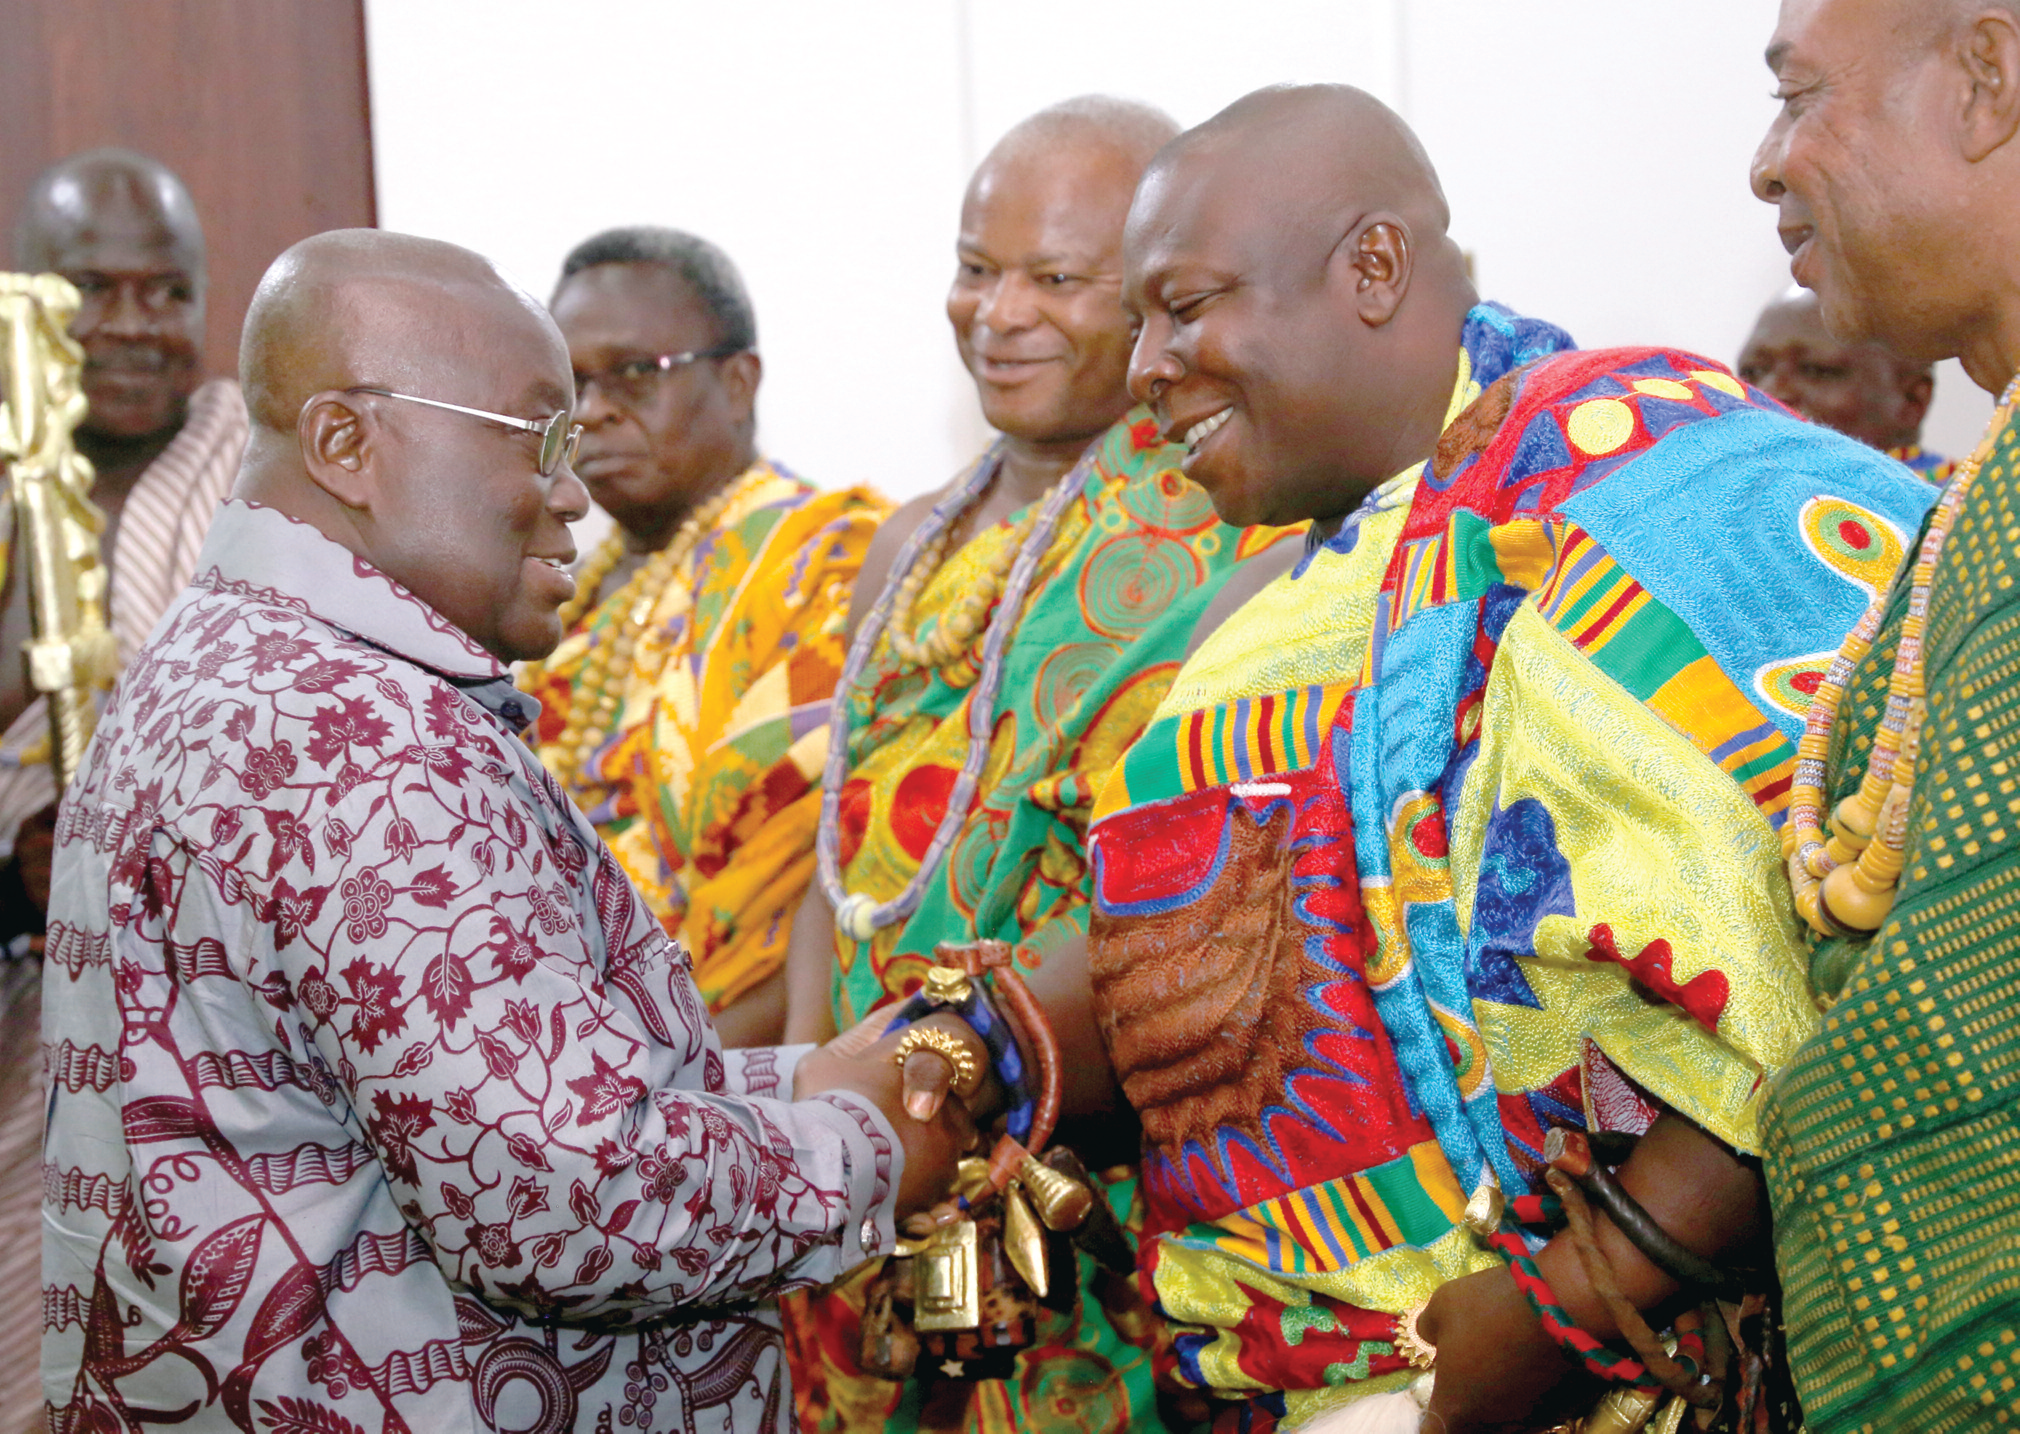 President Akufo-Addo welcoming Togbega Amenya Fiti V (2nd right), the Paramount Chief of the Aflao Traditional Area to the Flagstaff House in Accra.